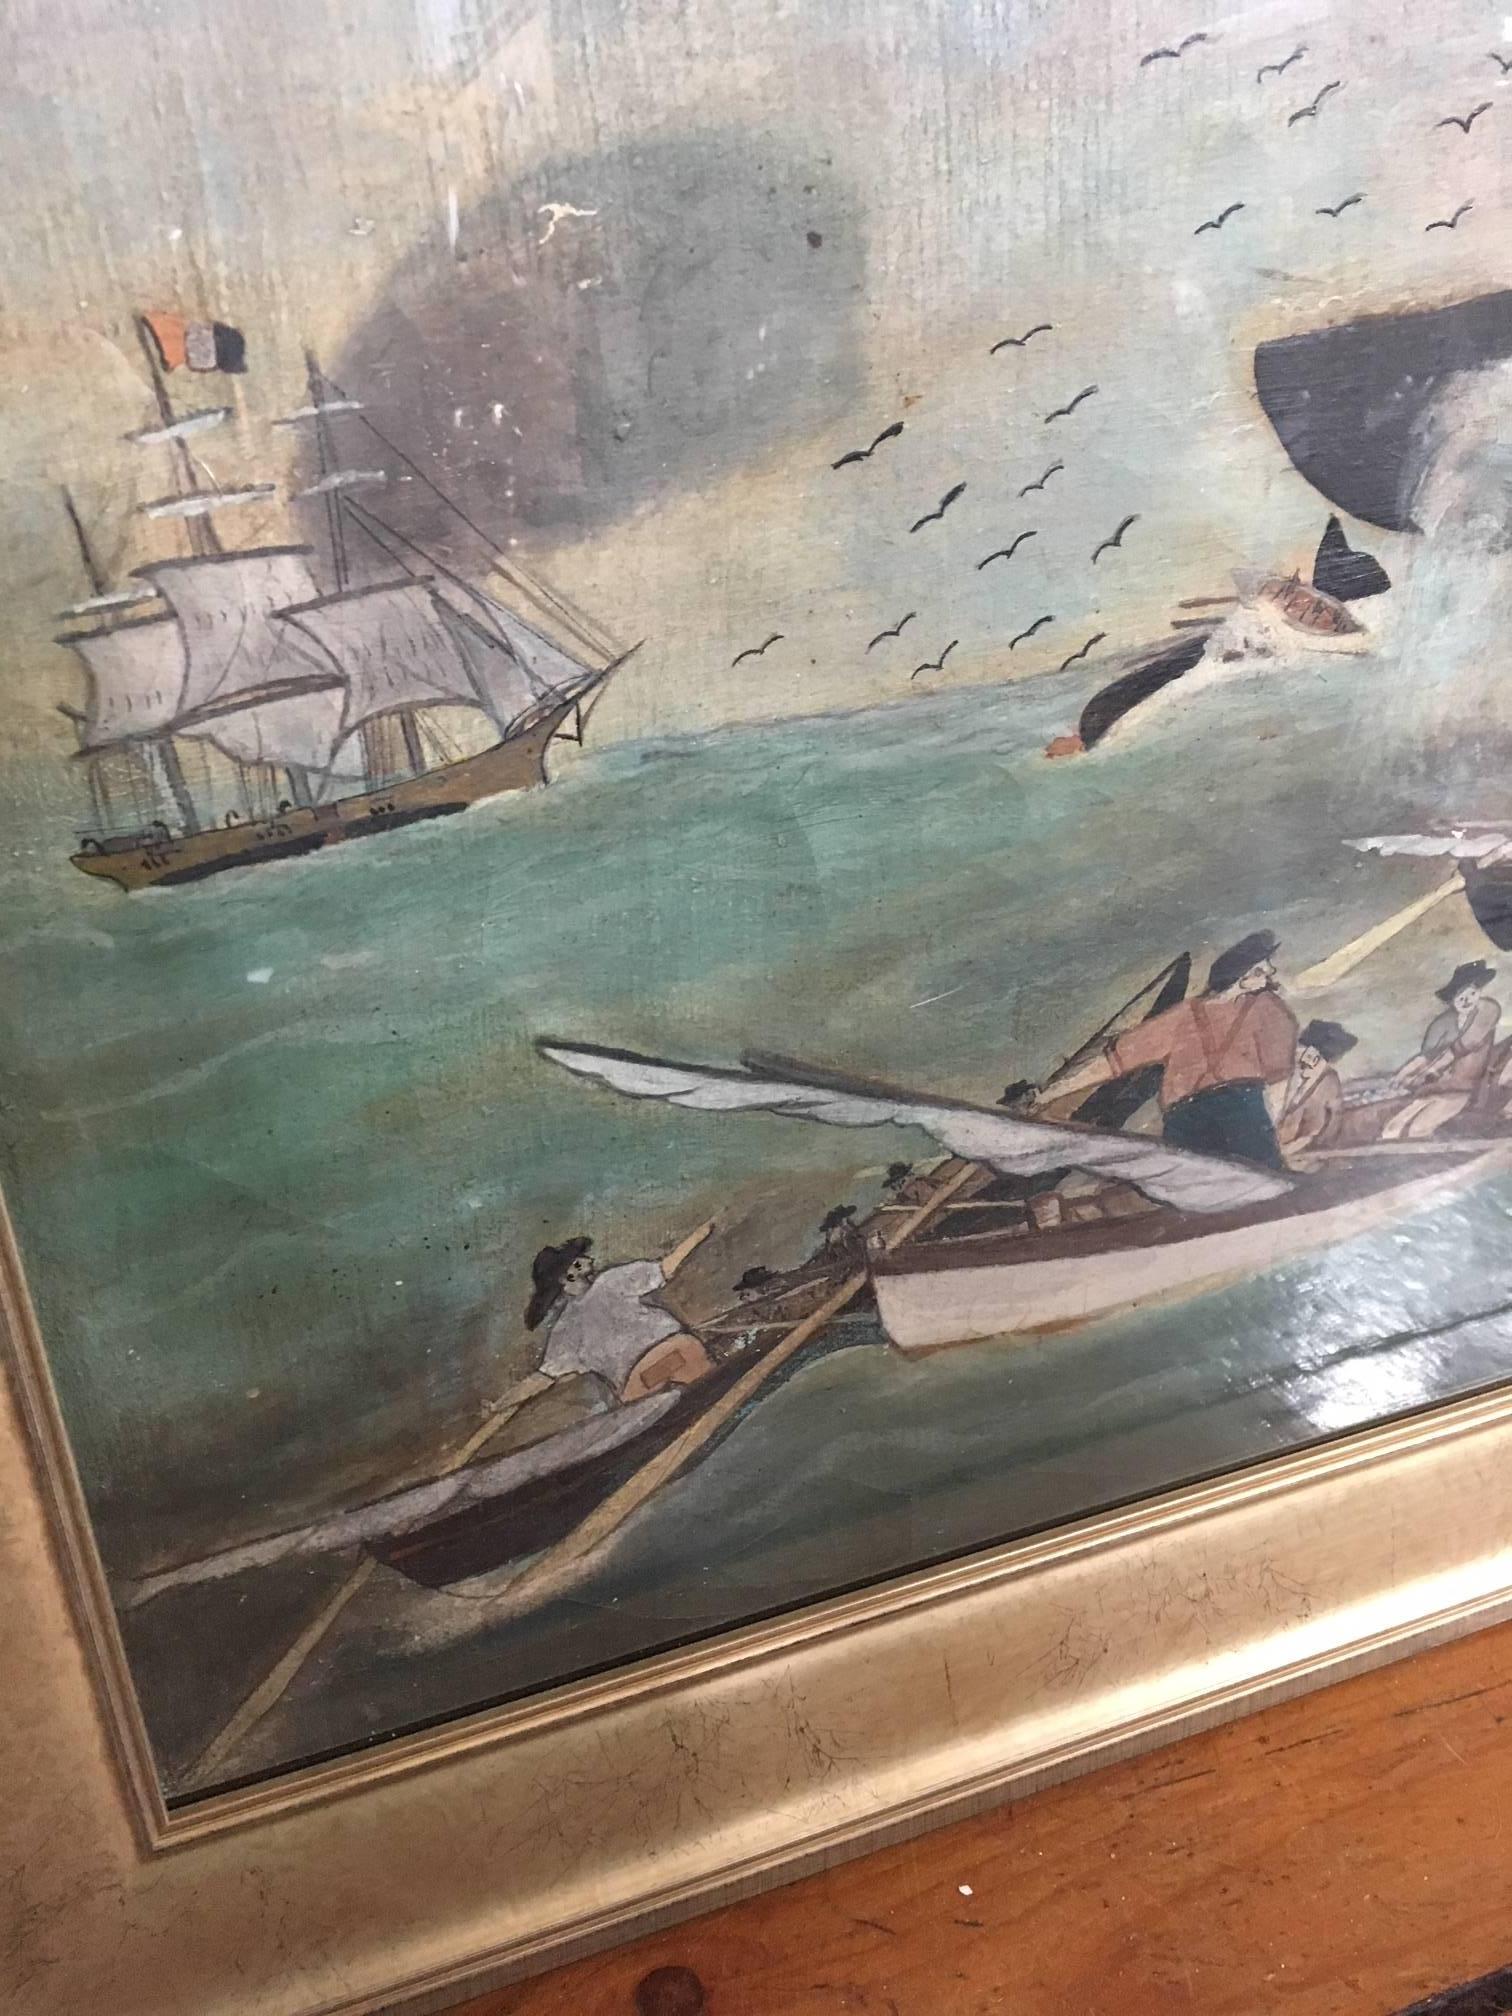 19th century Whaling Panorama, circa 1890, an oil on canvas view of whaling in the South Seas, with six boats lowered and three sperm whales in a flurry, three boats in peril and a close-up view of the whalemen. The painting is unusual in having